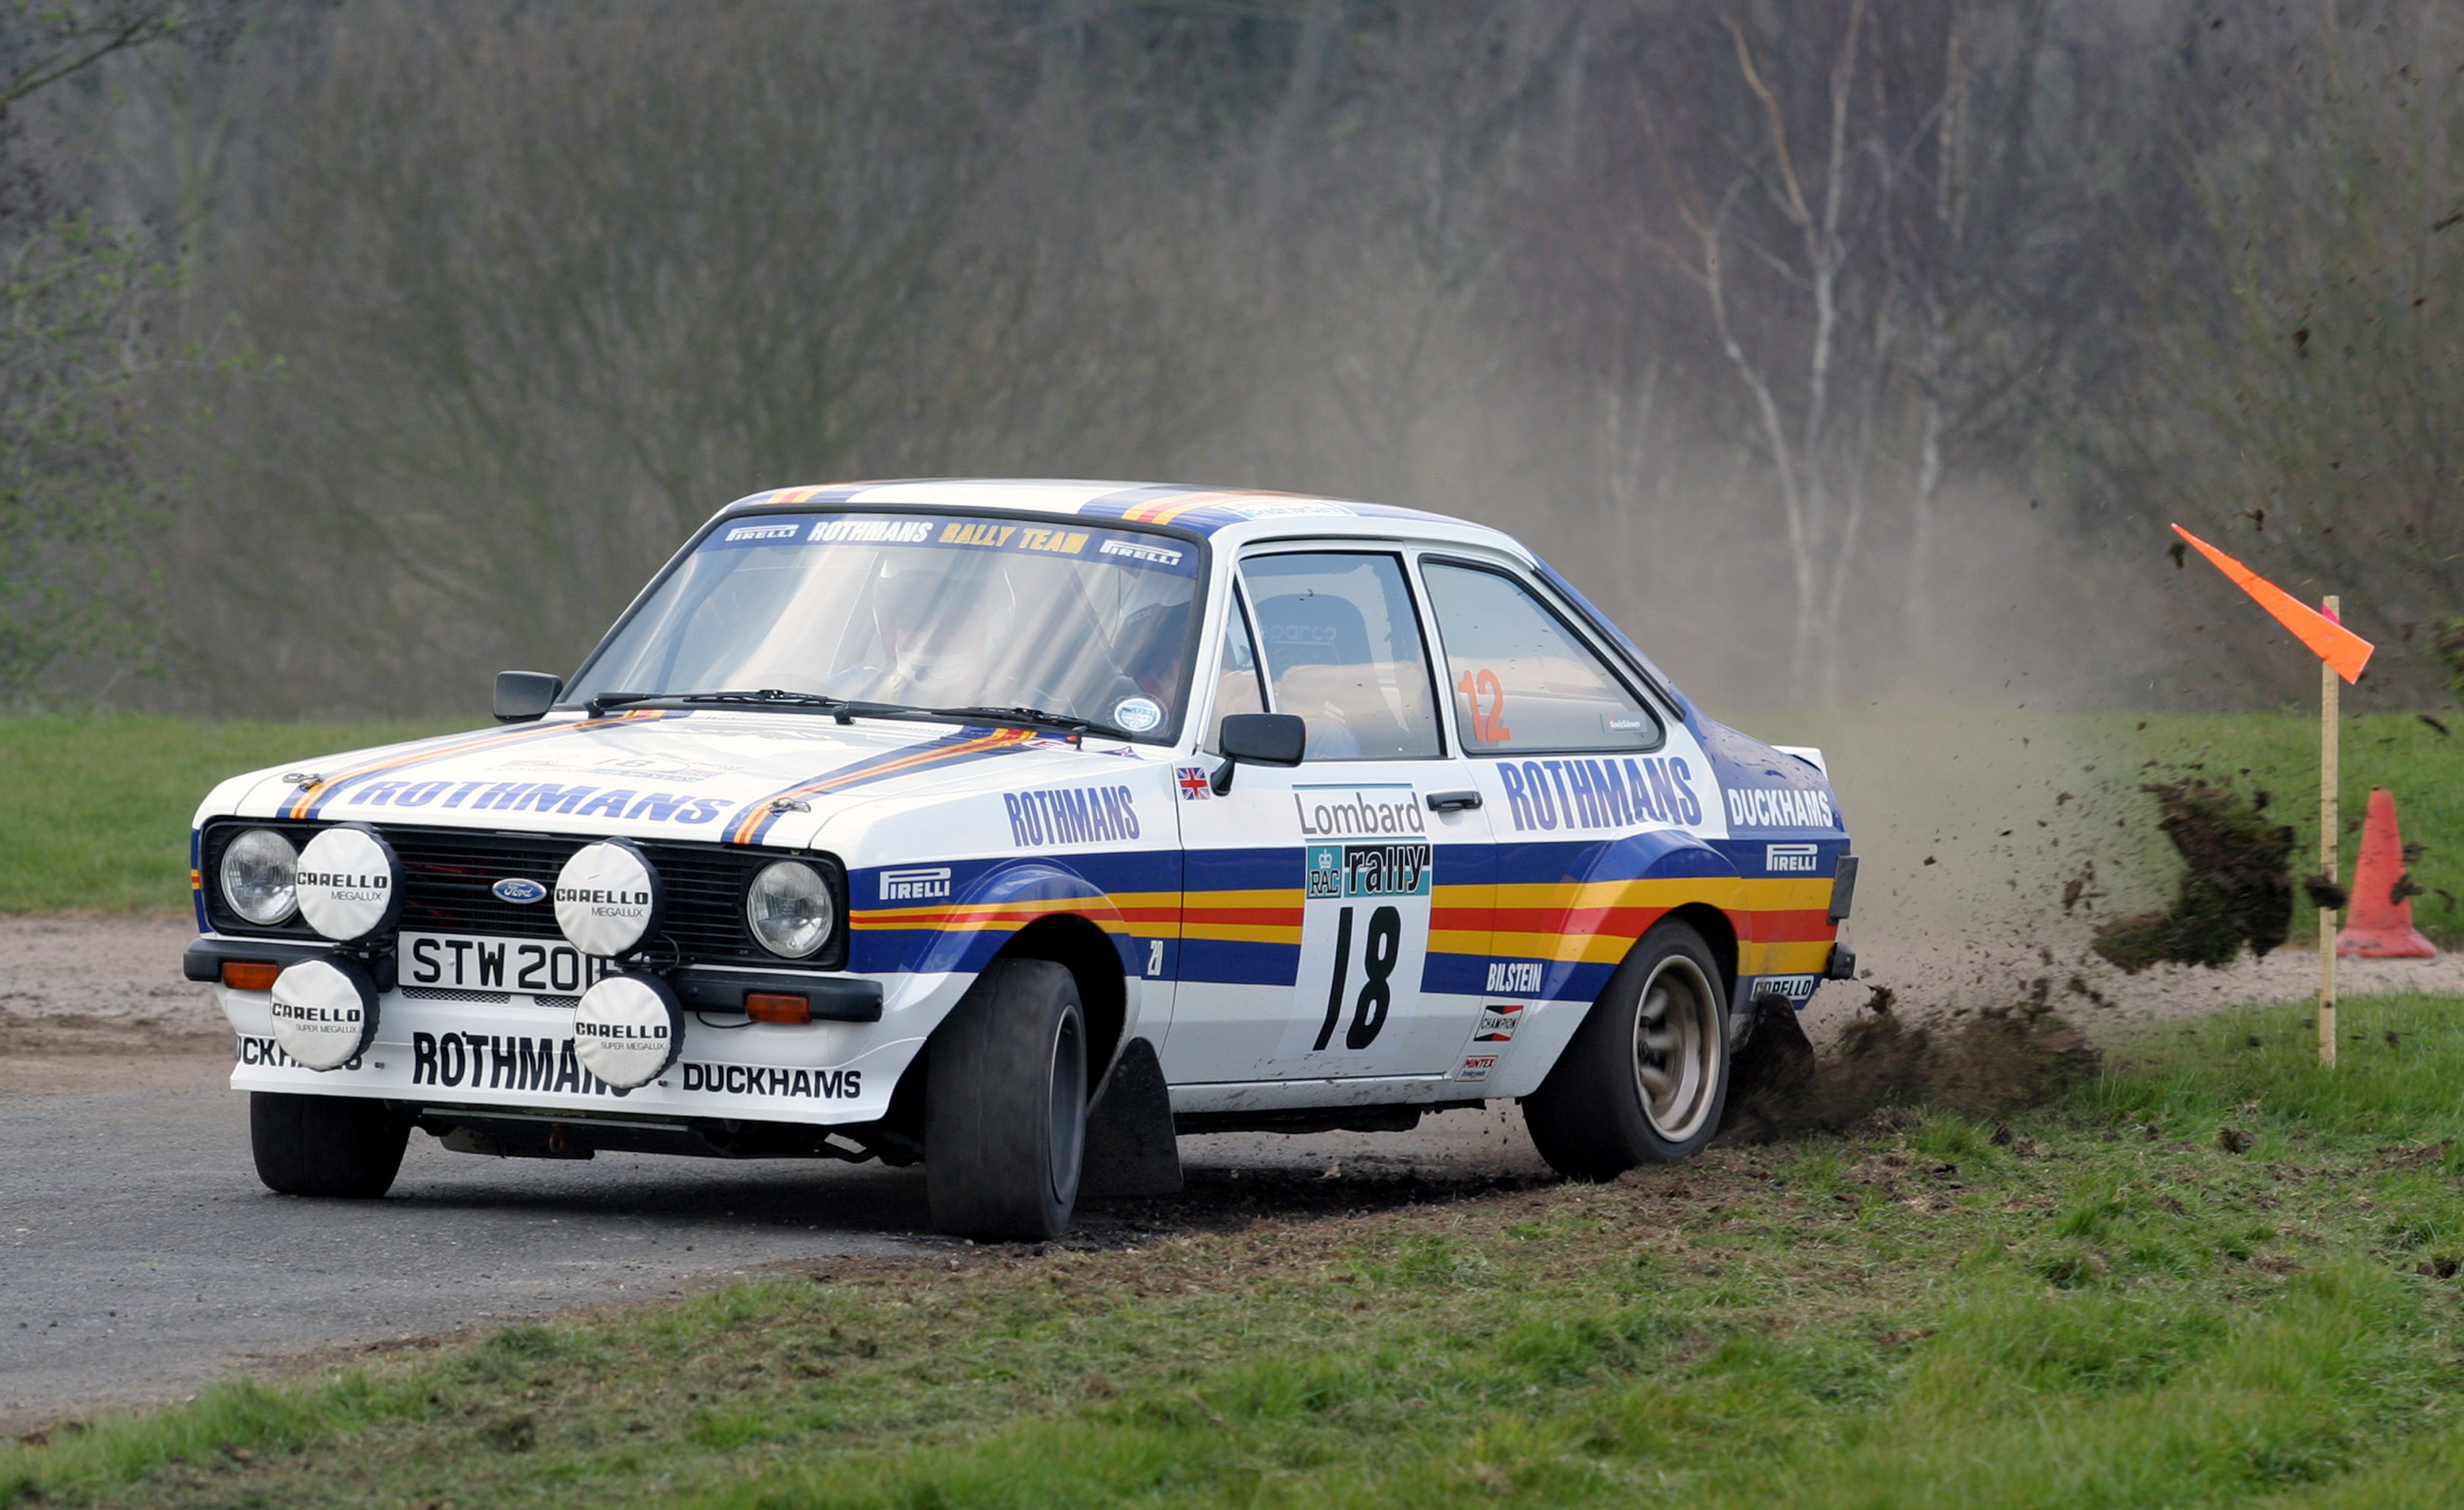 Ford Escort Mkii HD Wallpaper Background Image